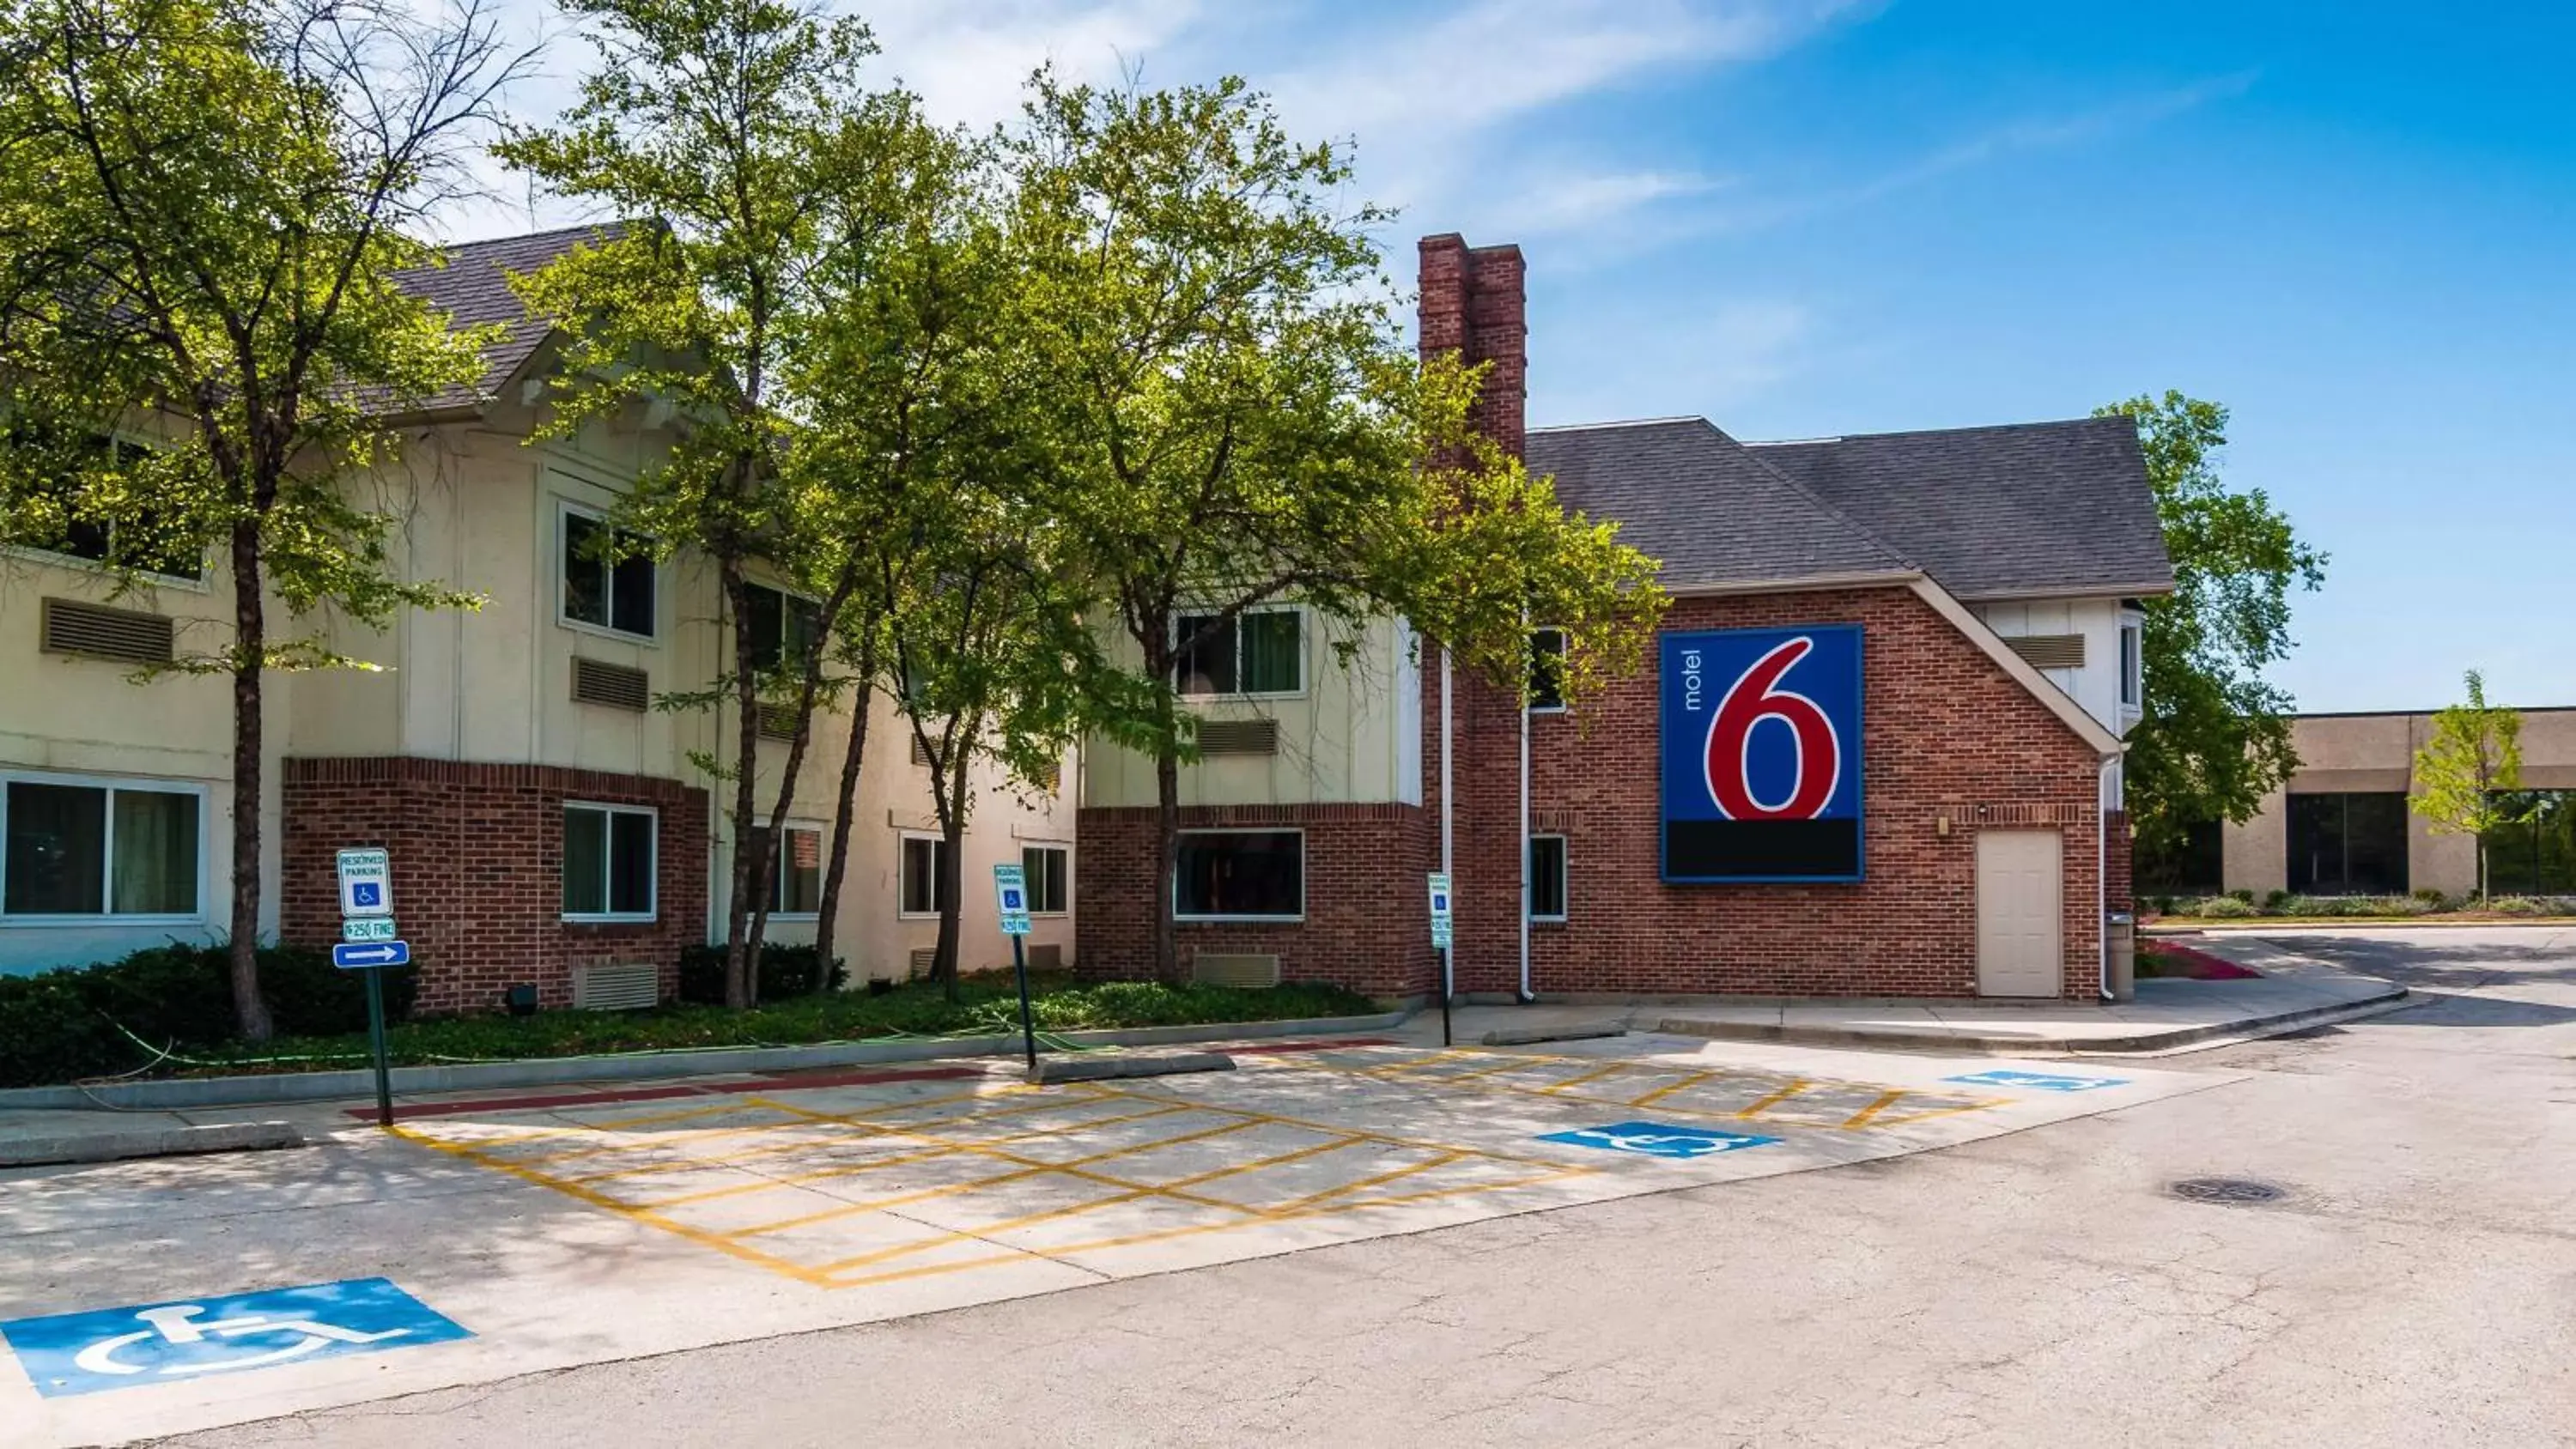 Property building in Motel 6-Arlington Heights, IL - Chicago North Central